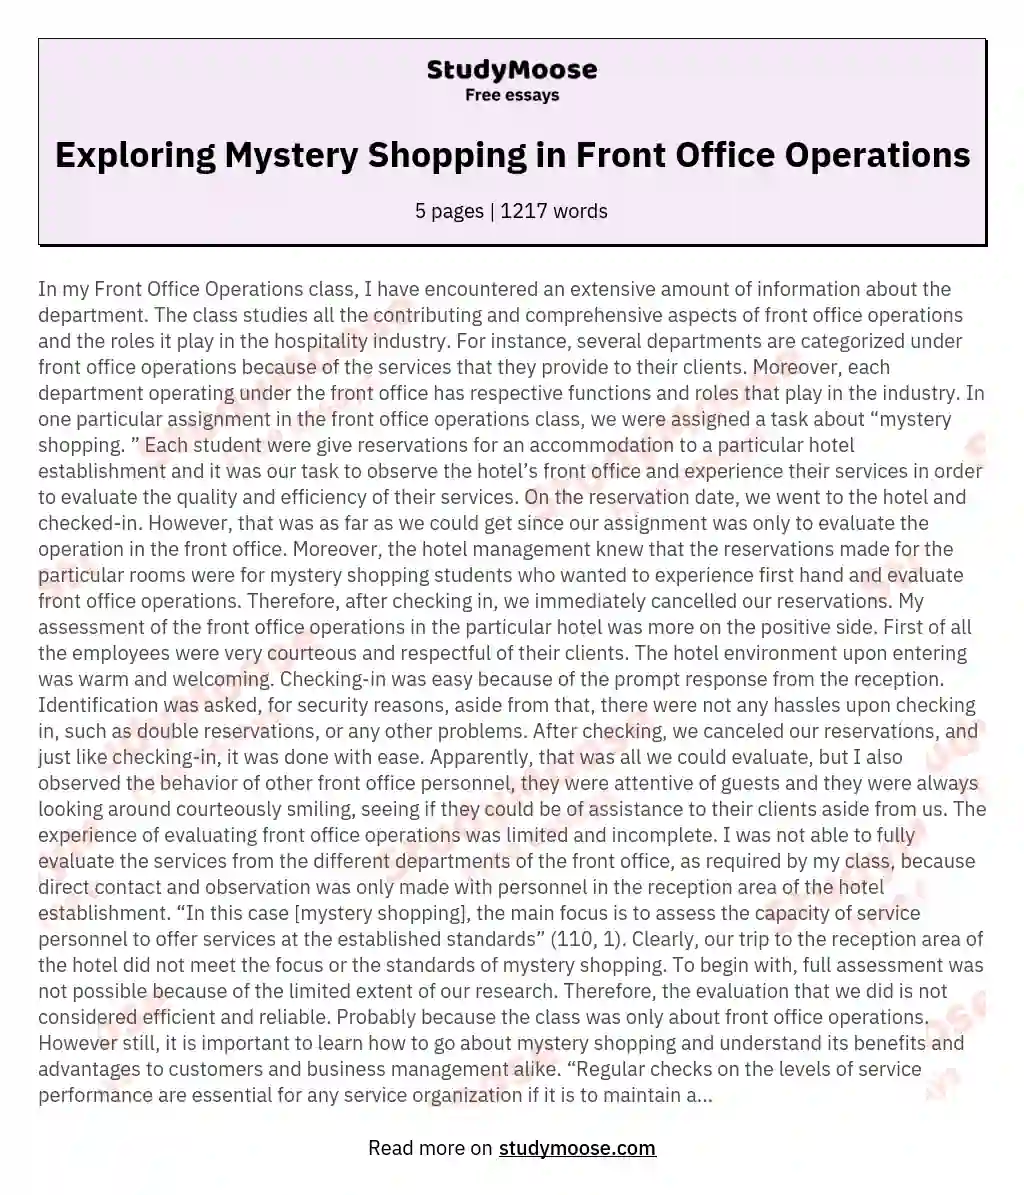 Exploring Mystery Shopping in Front Office Operations